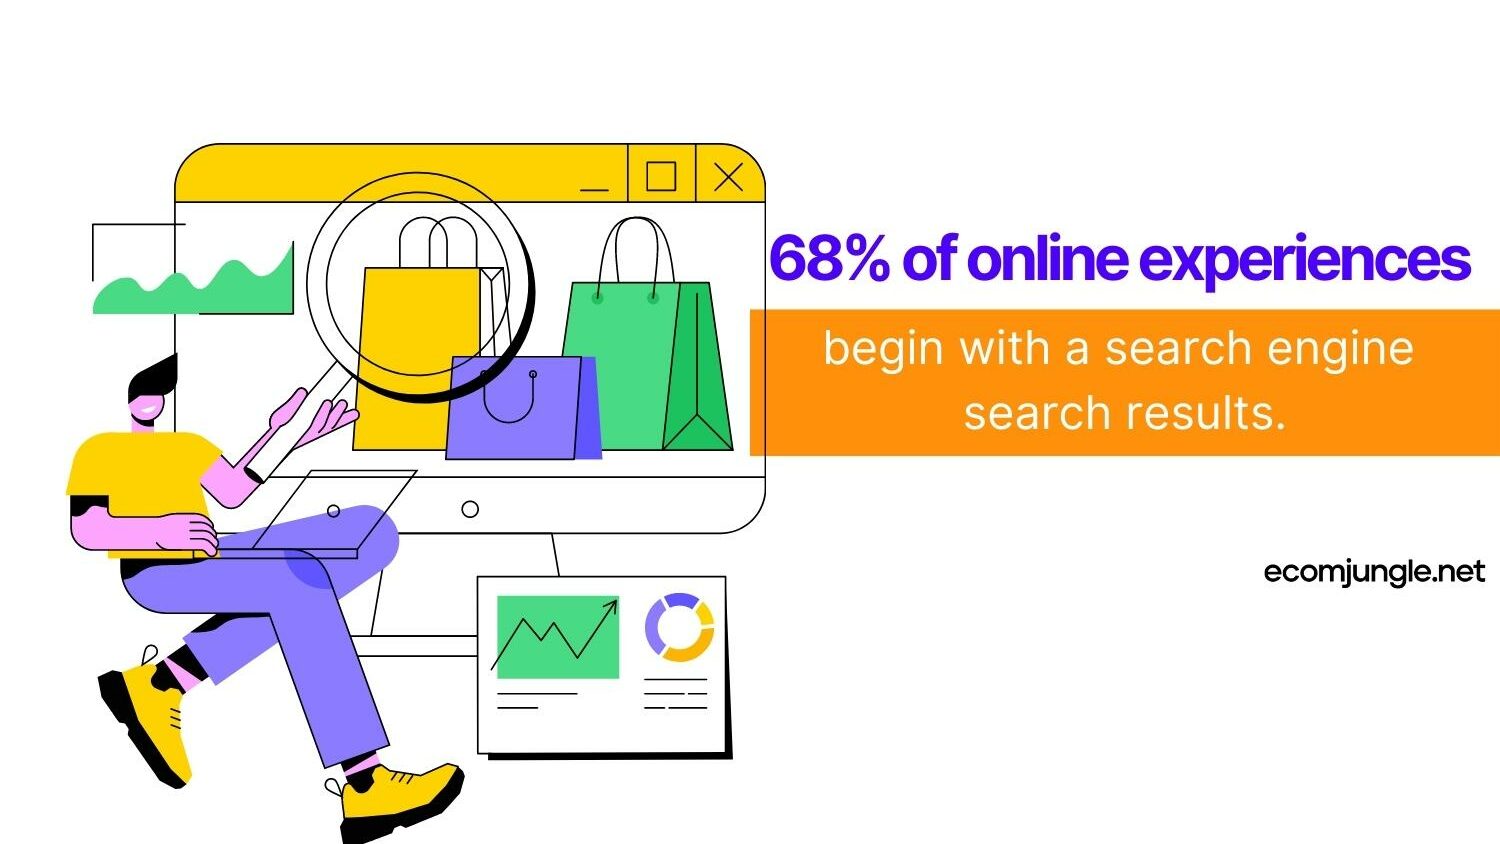 Most of the online experience begins with search results